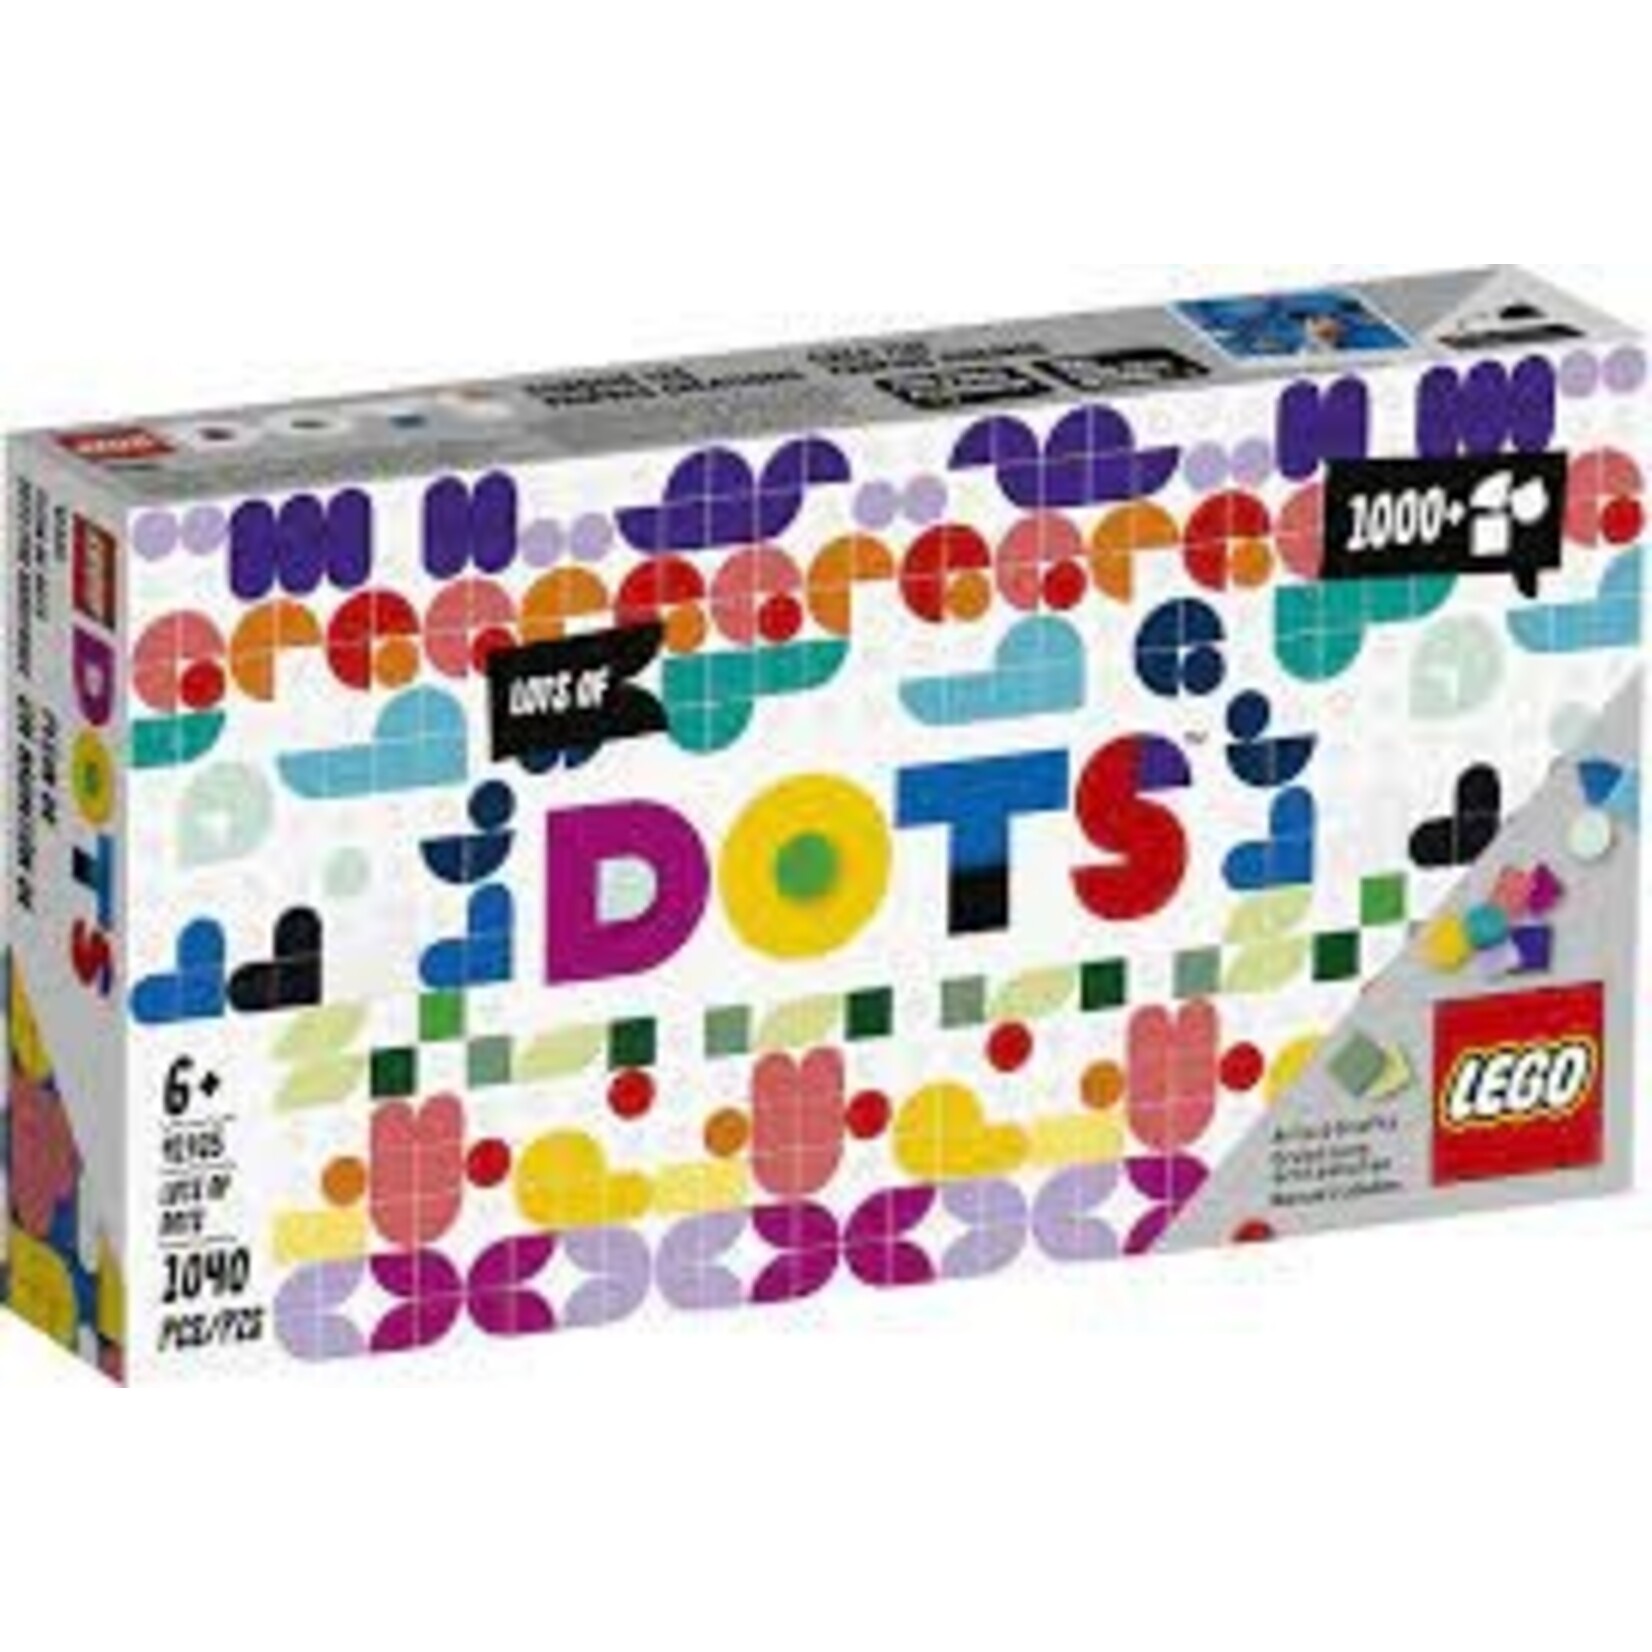 LEGO Lots Of Dots 1040pc